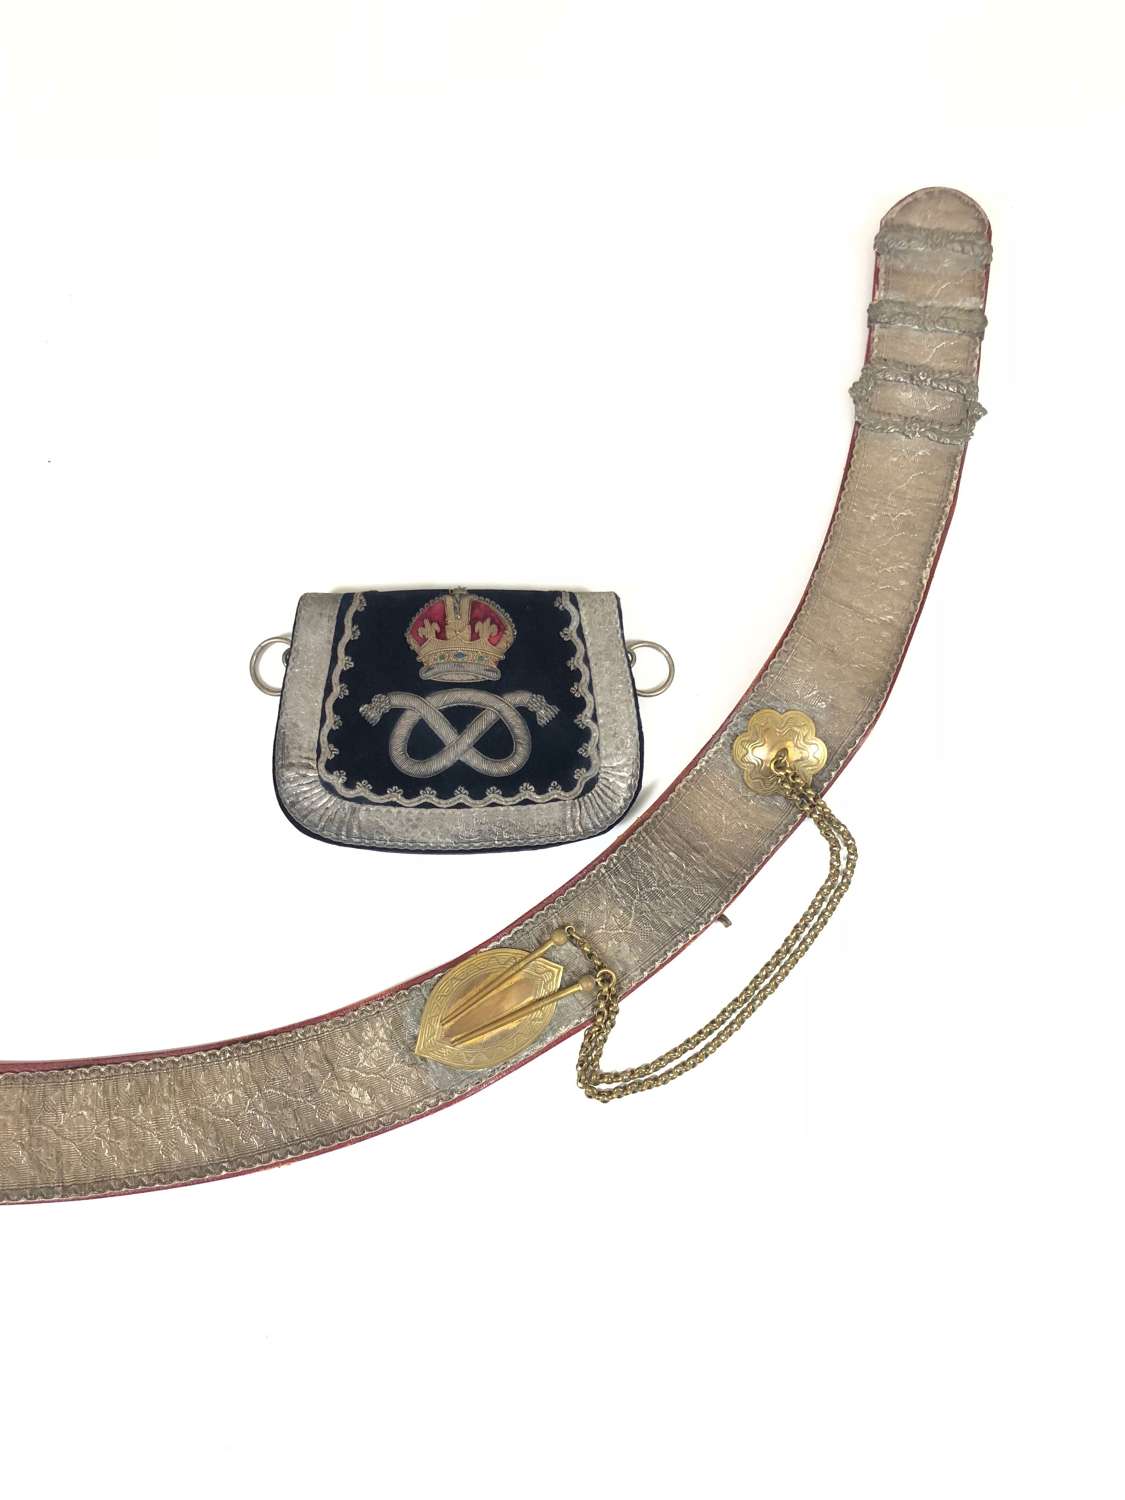 Queen’s Own Staffordshire Yeomanry post 1901 Officer’s pouch and belt